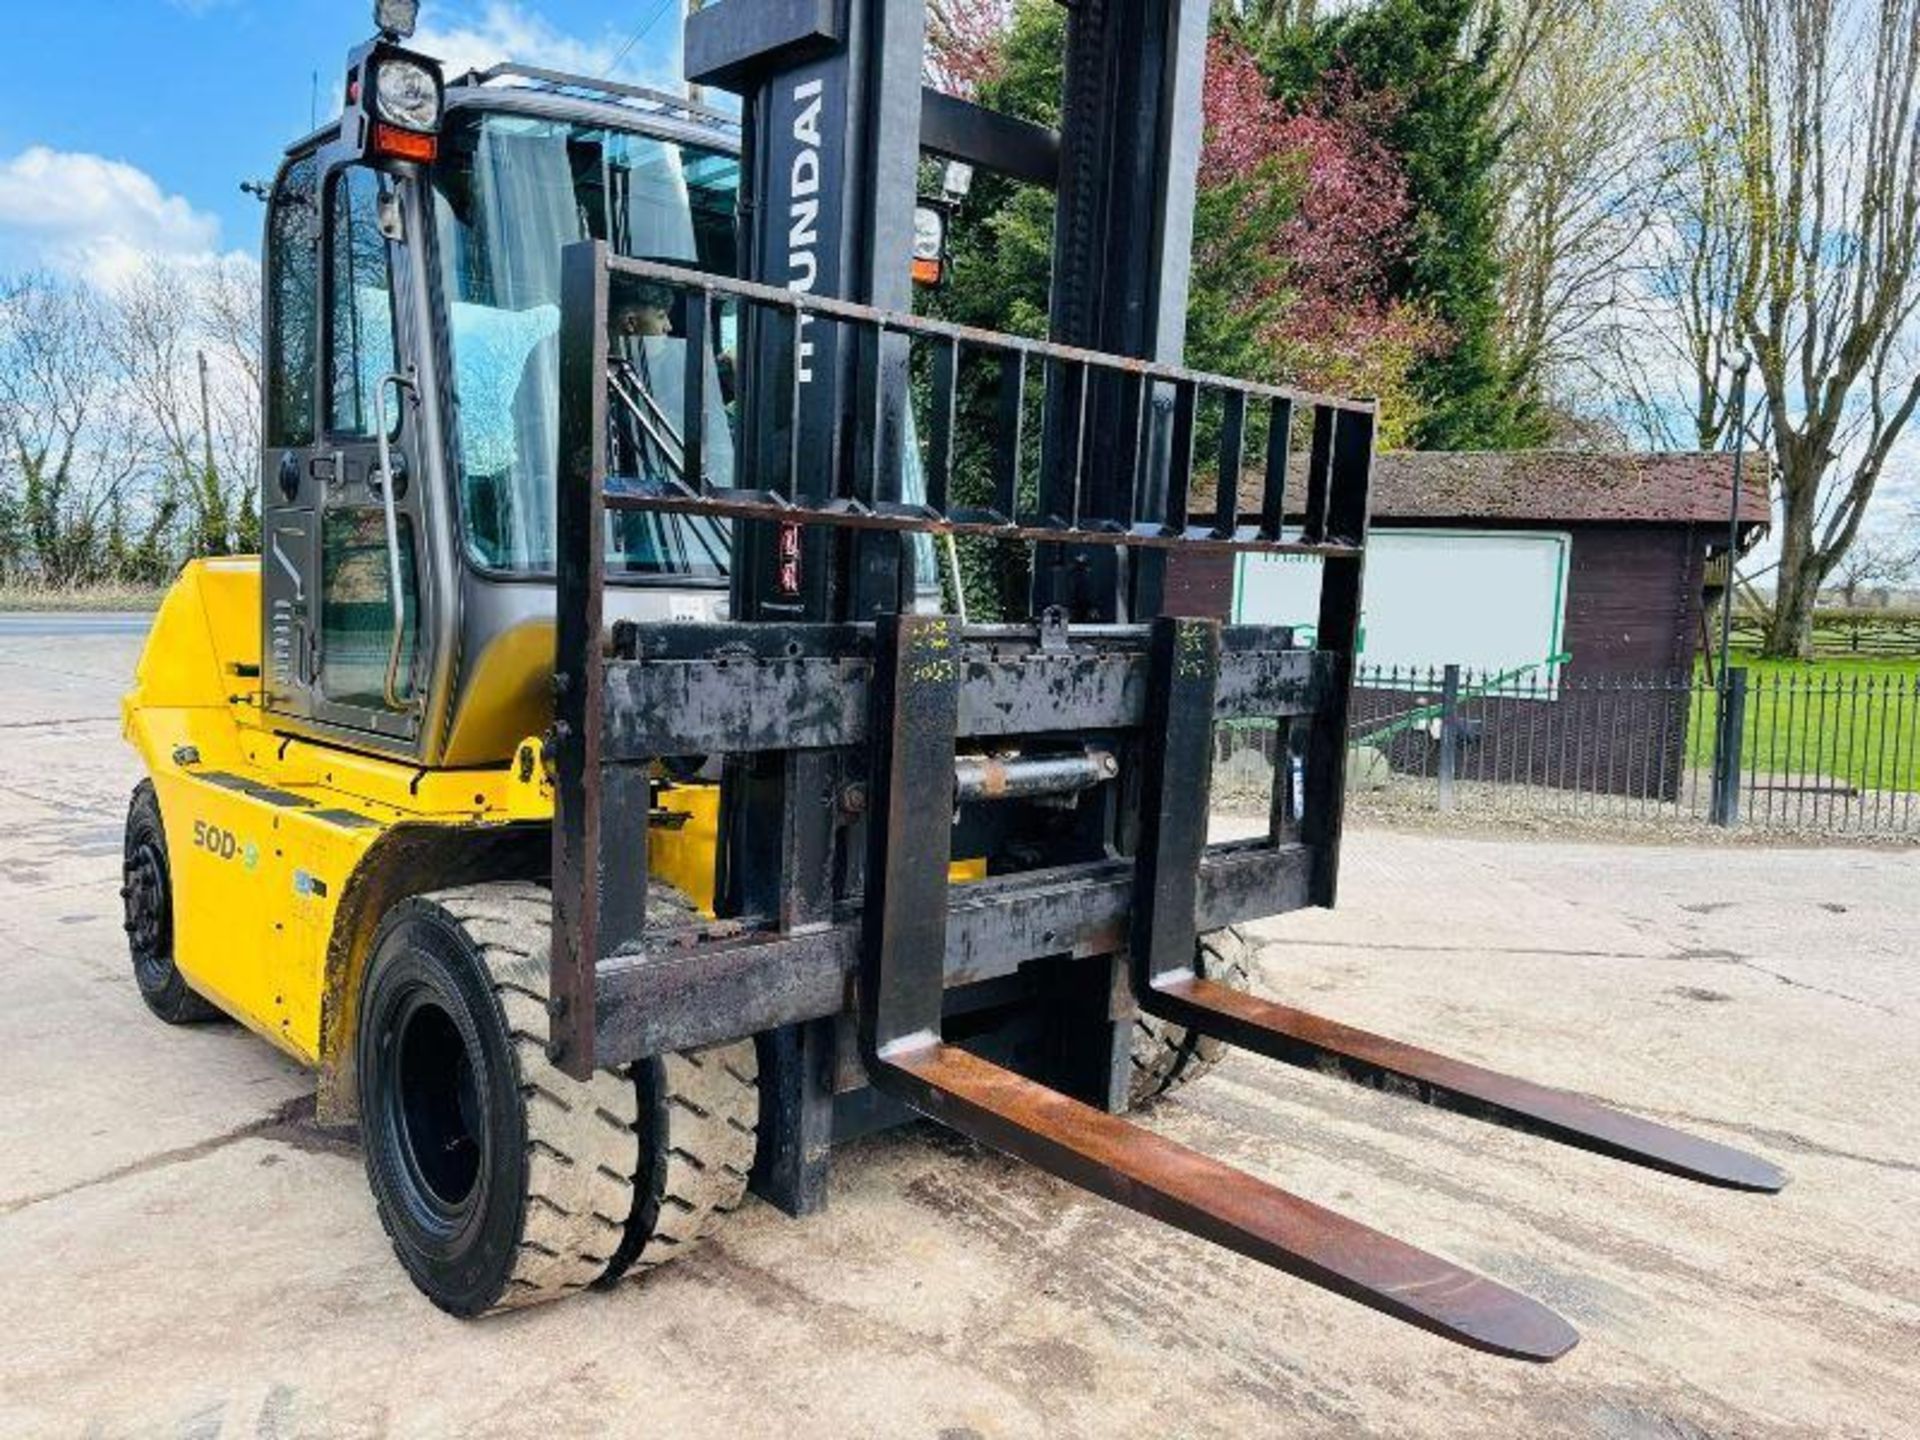 HYUNDAI 50D-9 DIESEL FORKLIFT *YEAR 2016, 5 TON LIFT* C/W SIDE SHIFT - Image 17 of 17